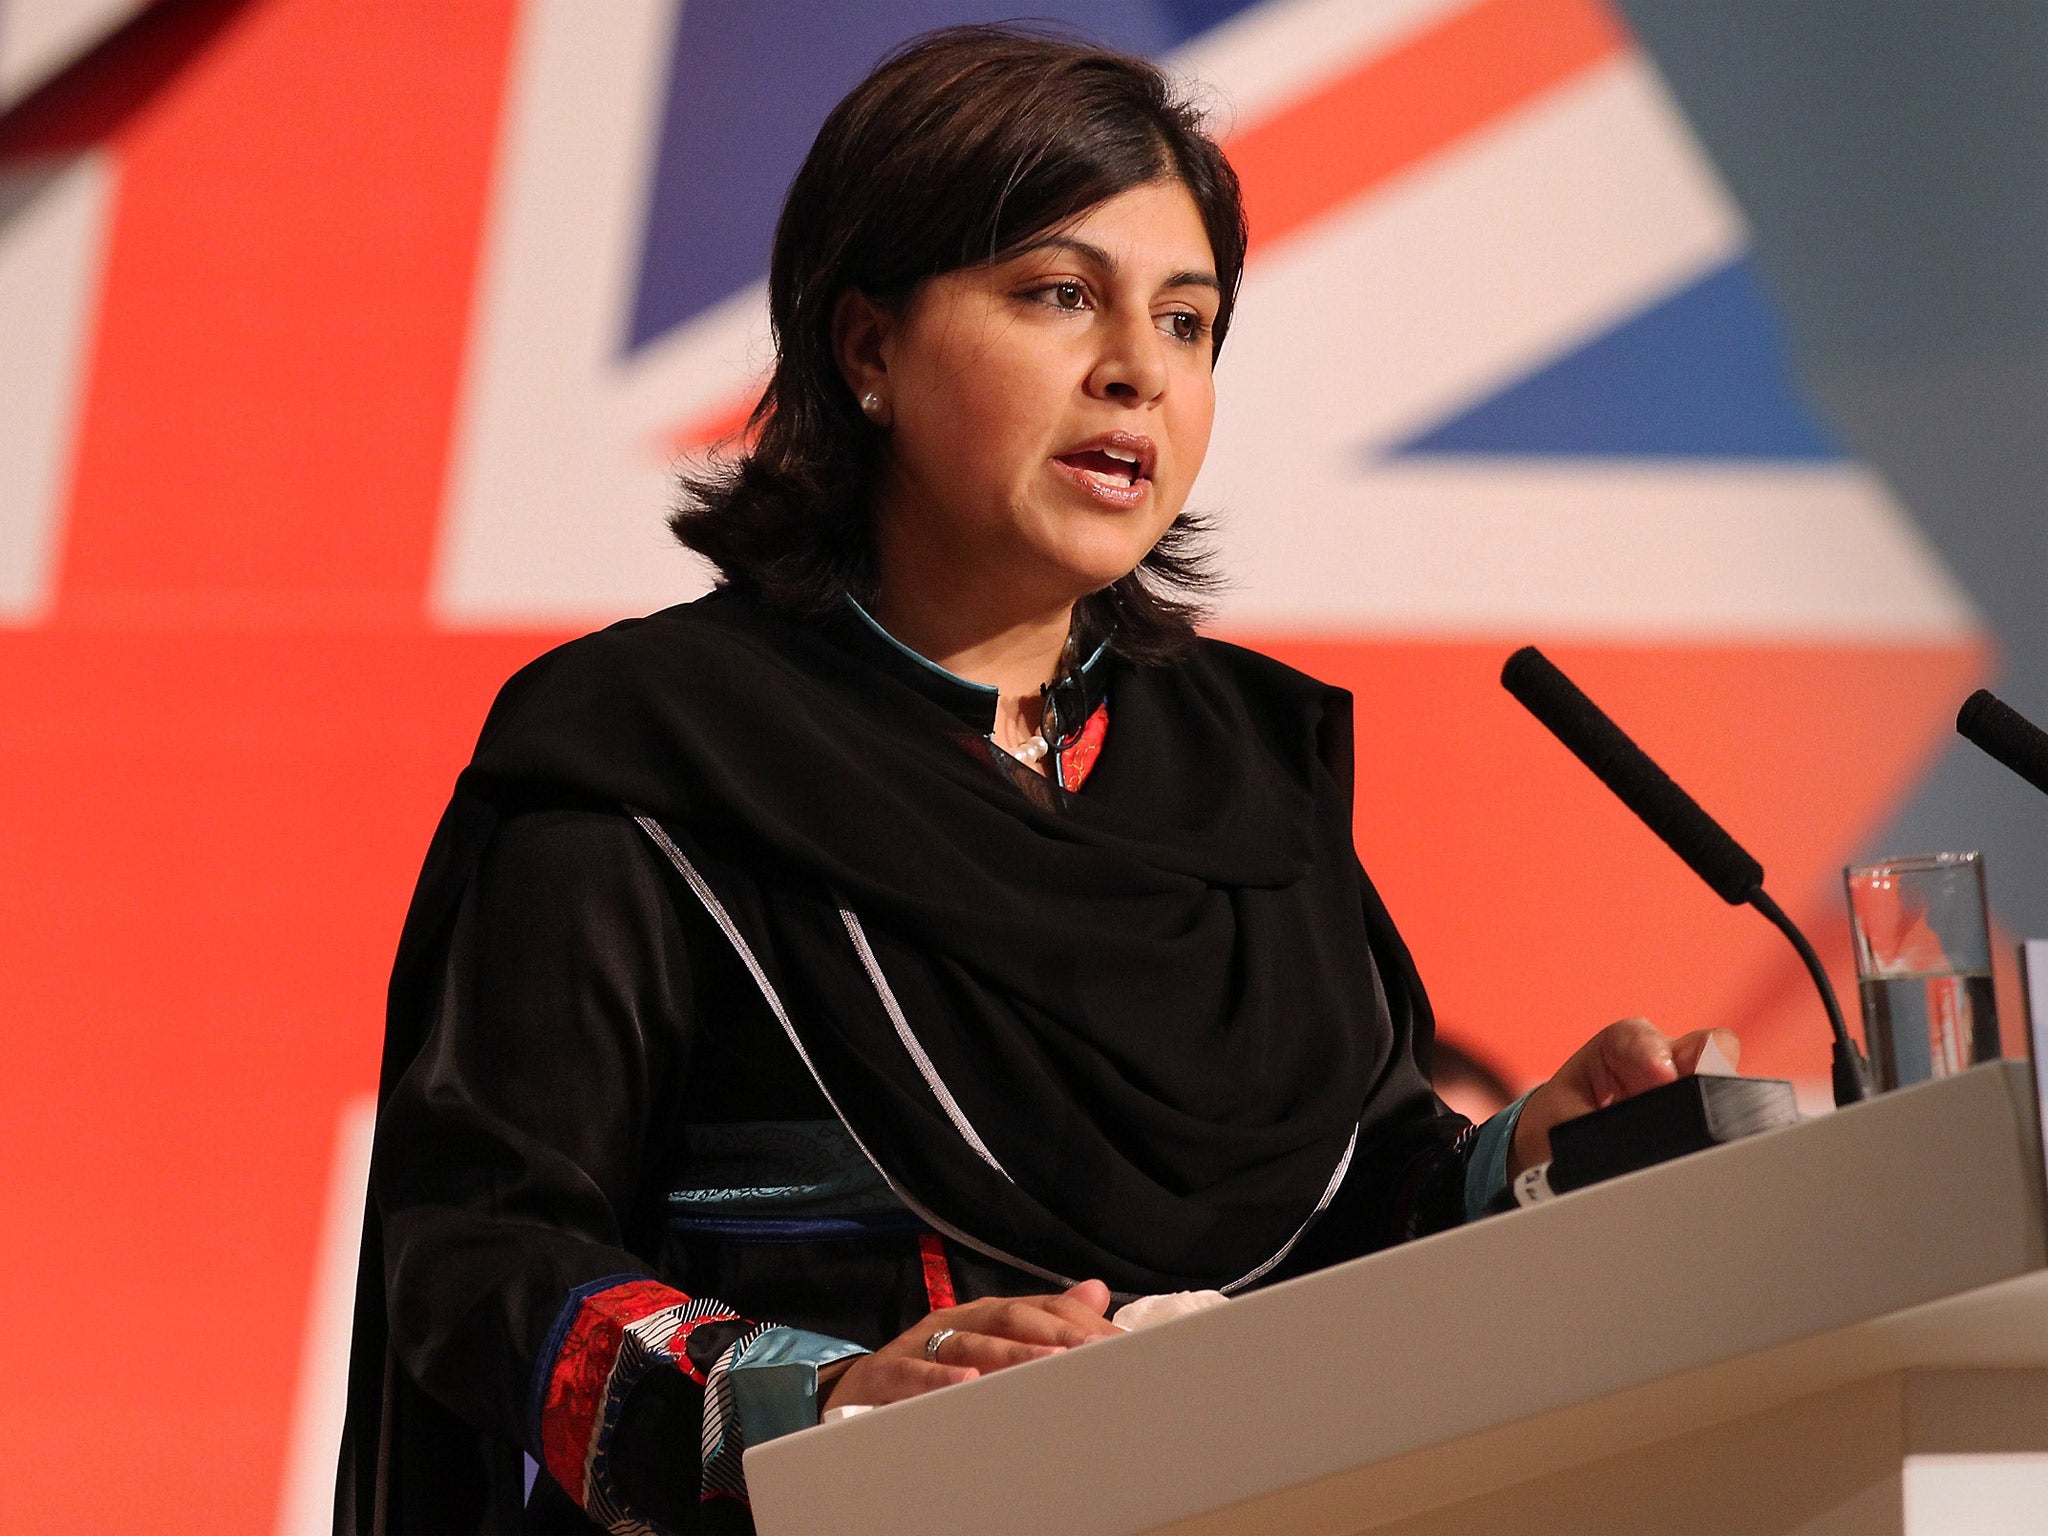 Baroness Warsi resigned over the Government's position on the conflict in Gaza